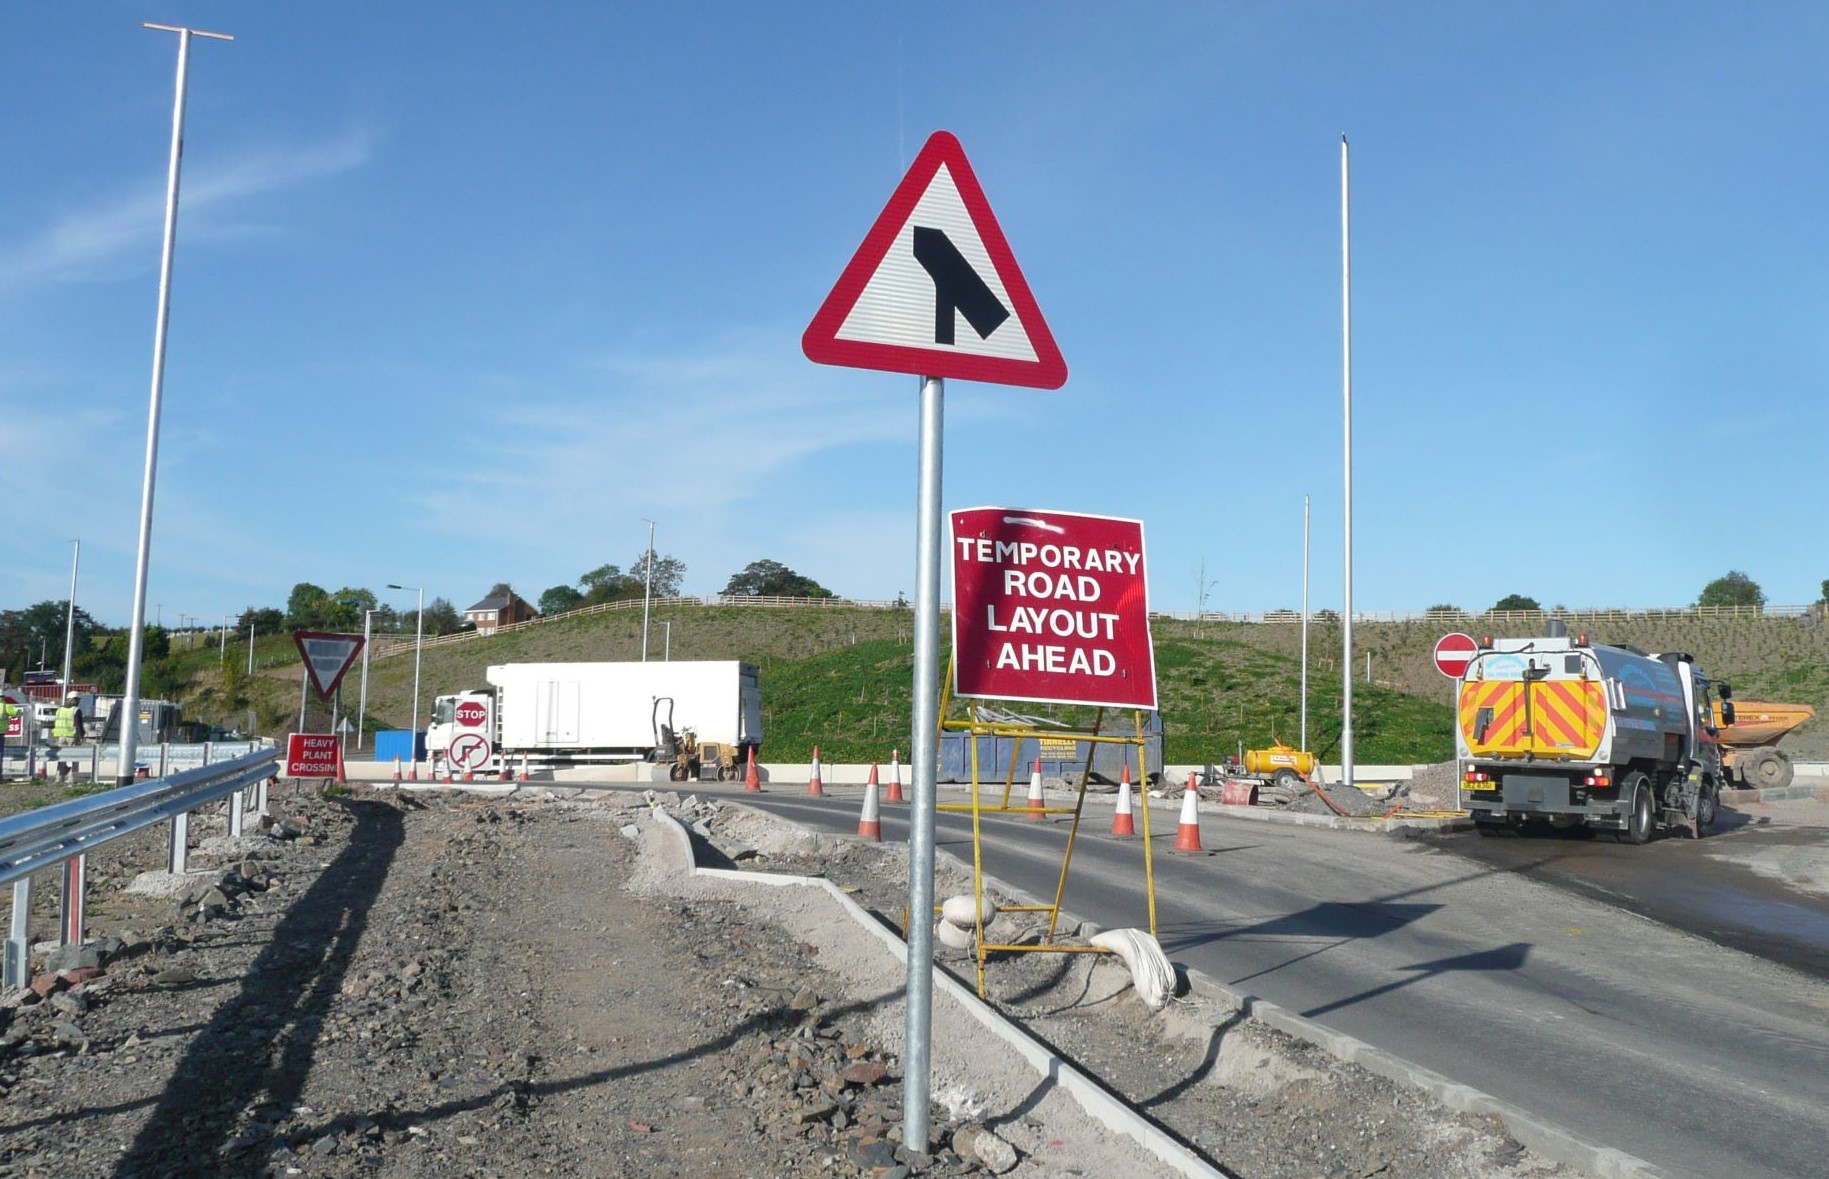 Traffic management system with signs warning vehicles of a temporary road layout ahead.